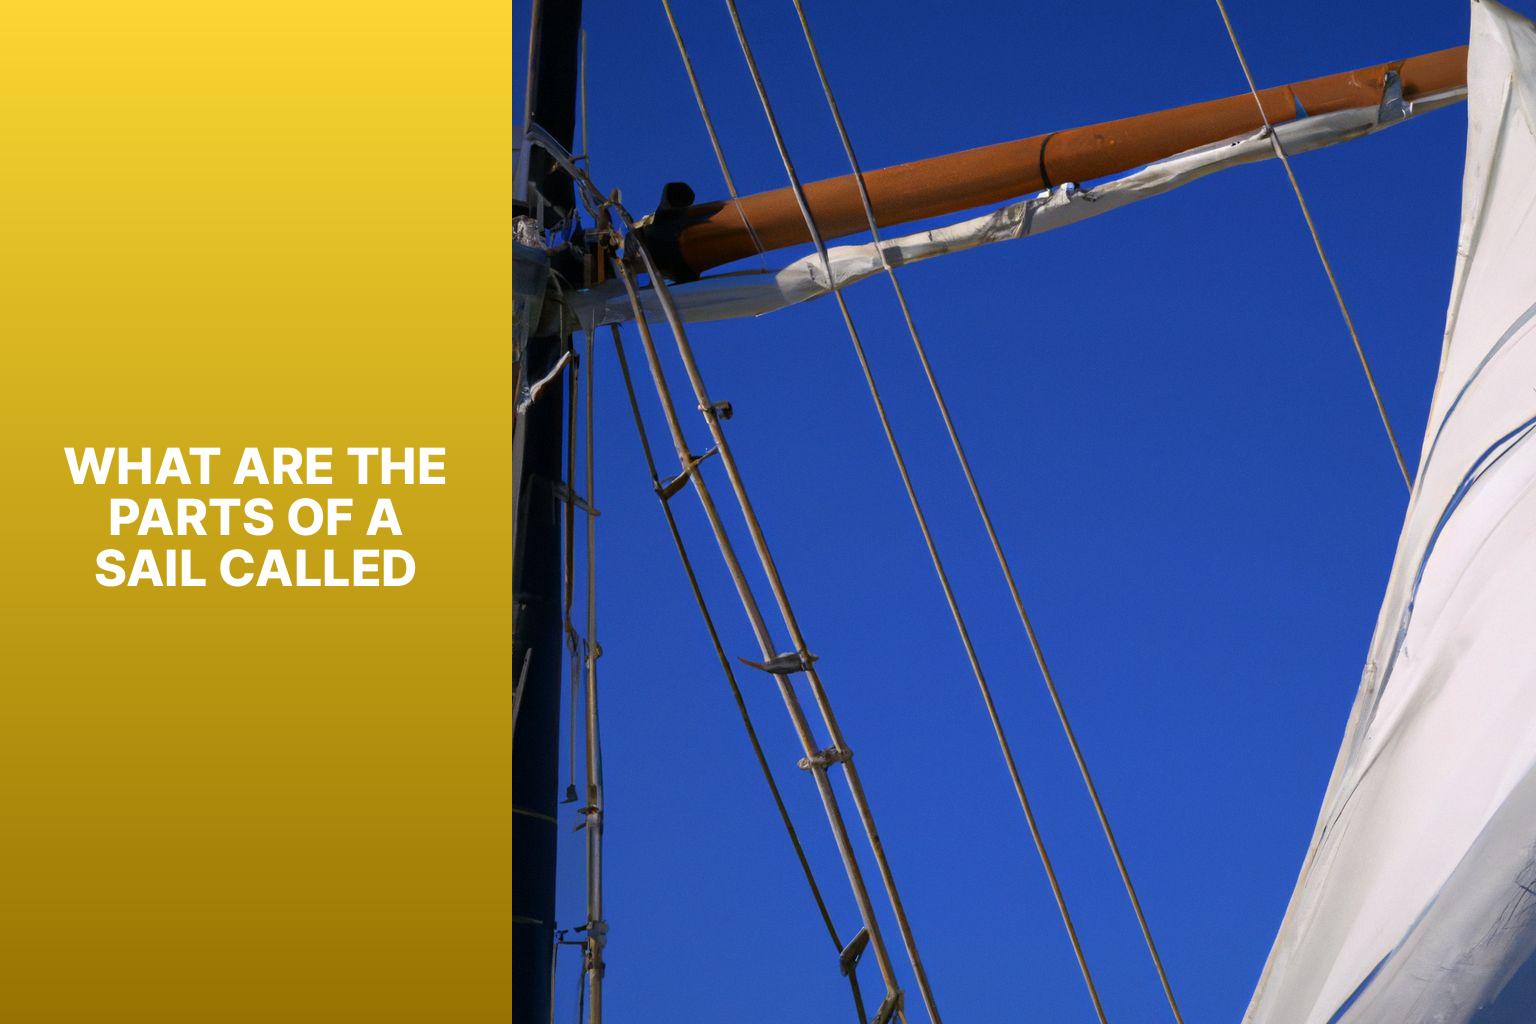 what are the parts of a sailboat called